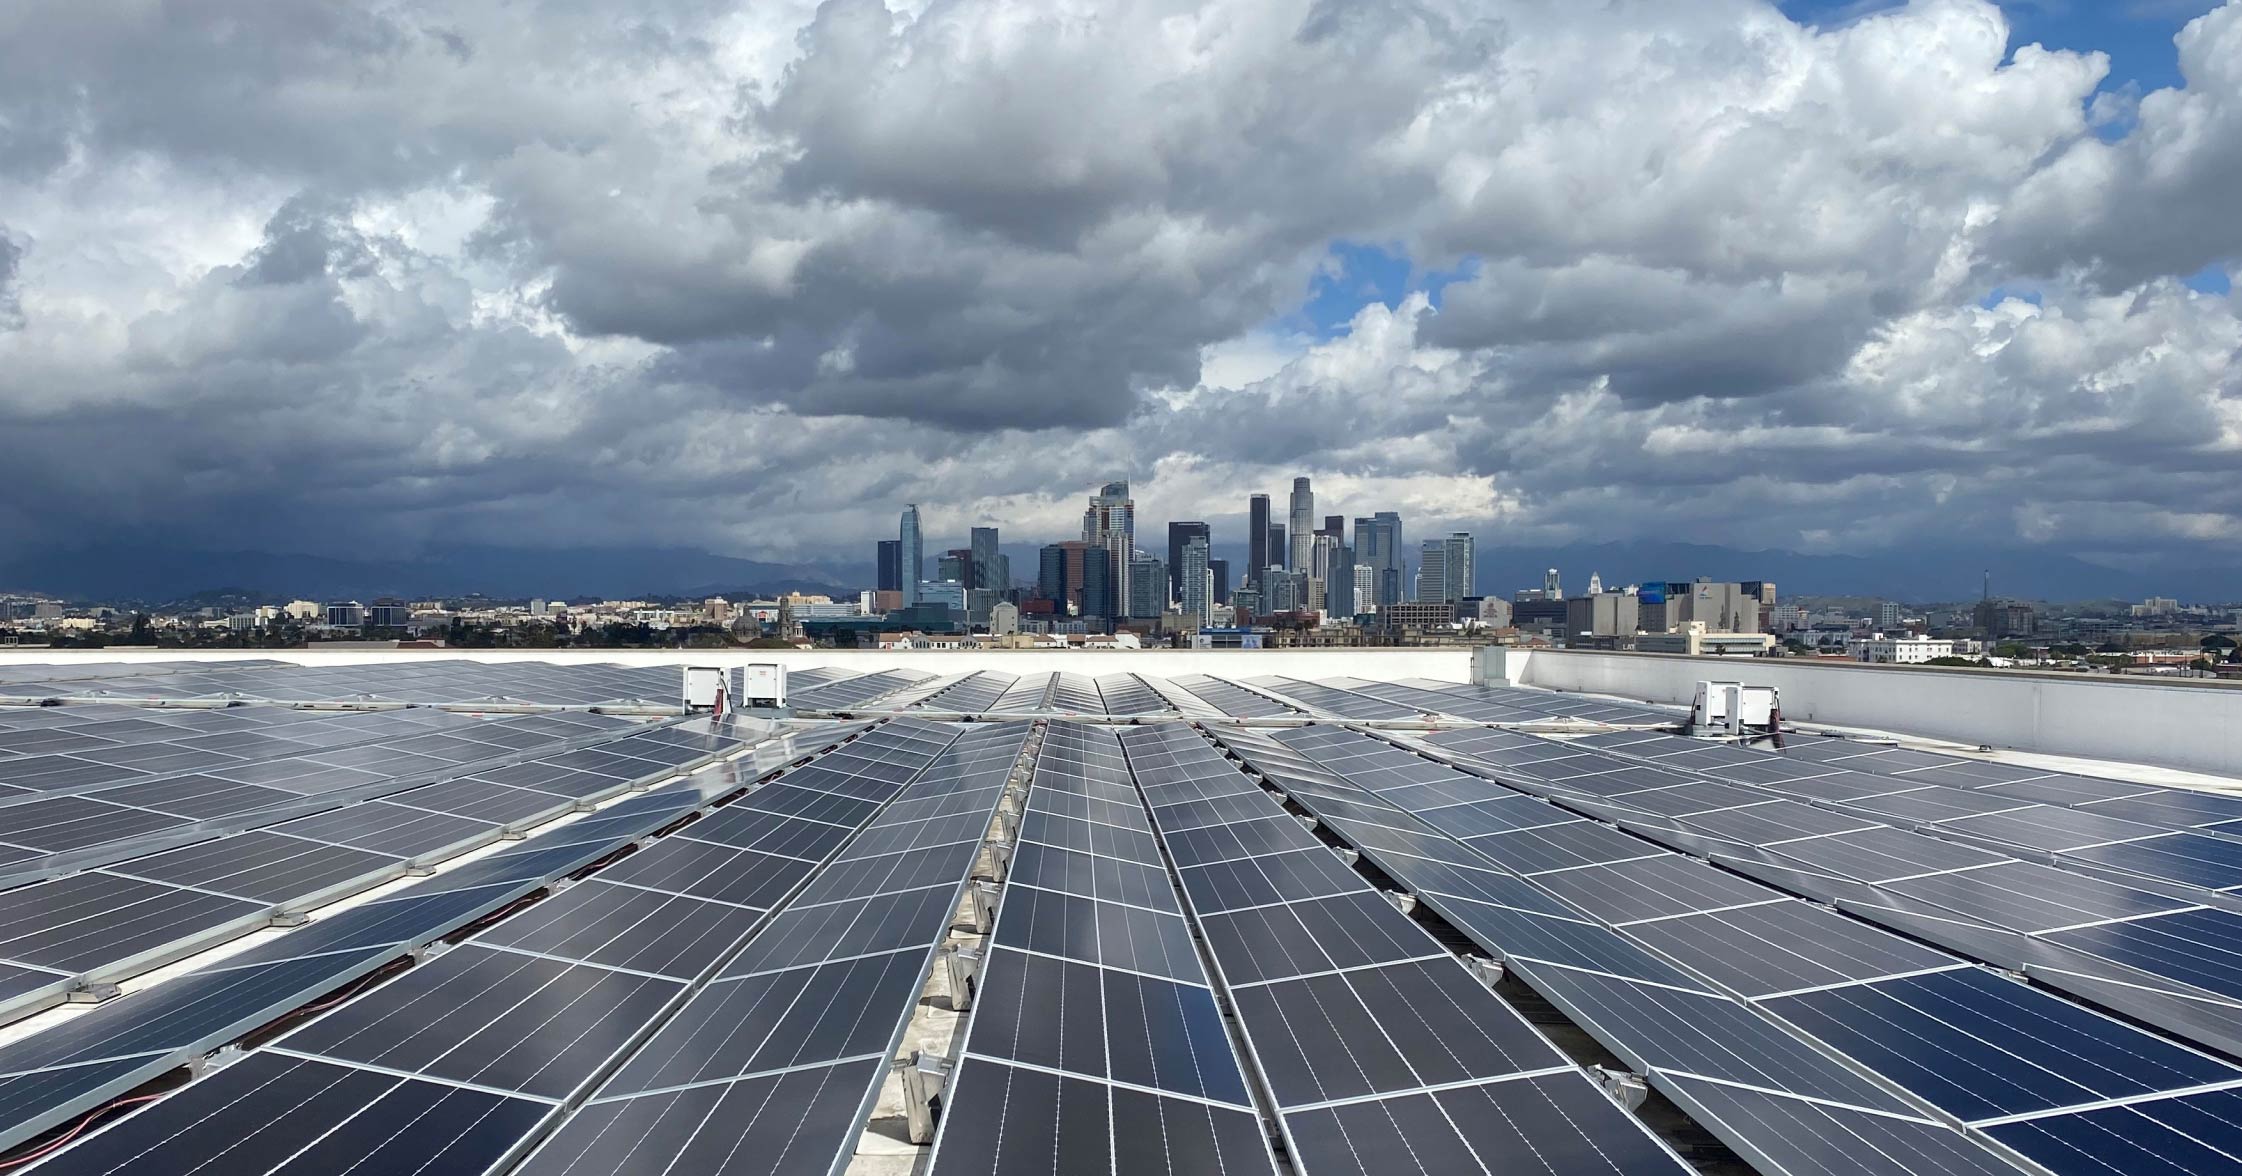 USC Sustainability solar panels against sky with downtown Los Angeles in background